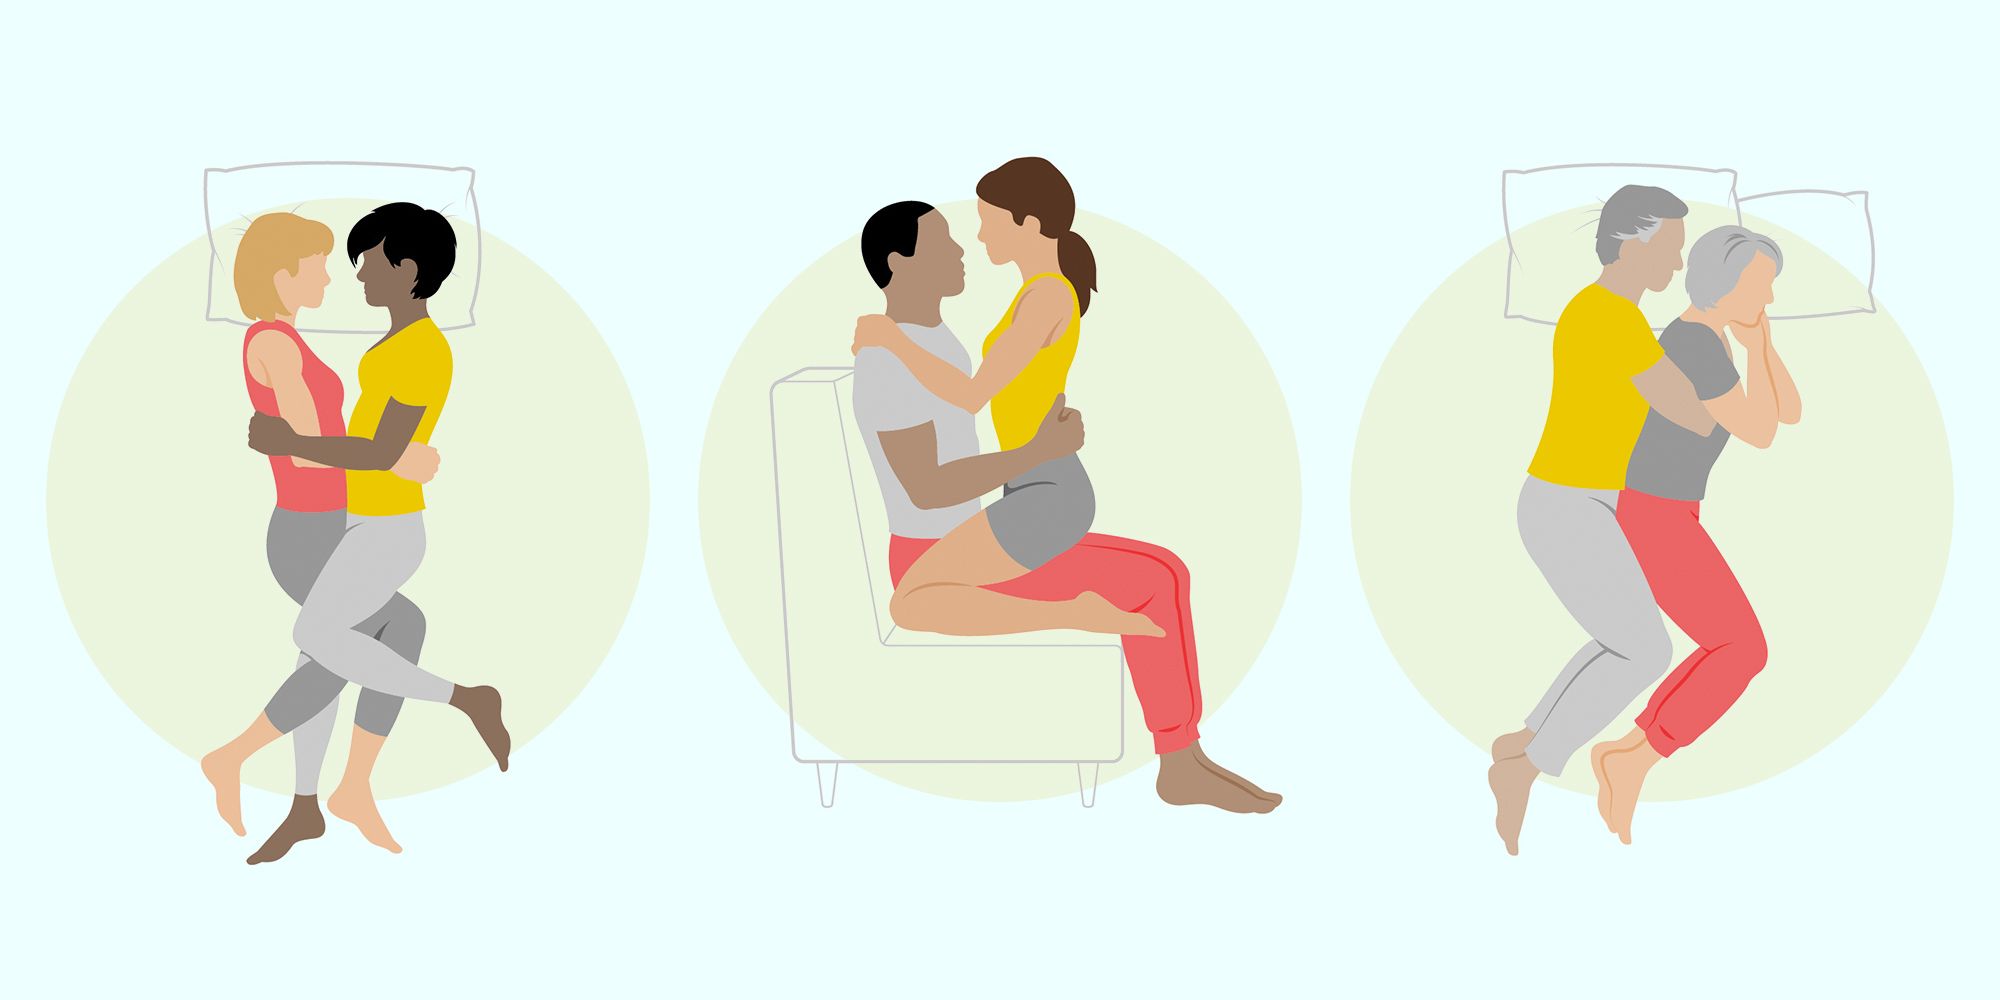 How to Cuddle12 Best Positions for Couples, Plus Benefits